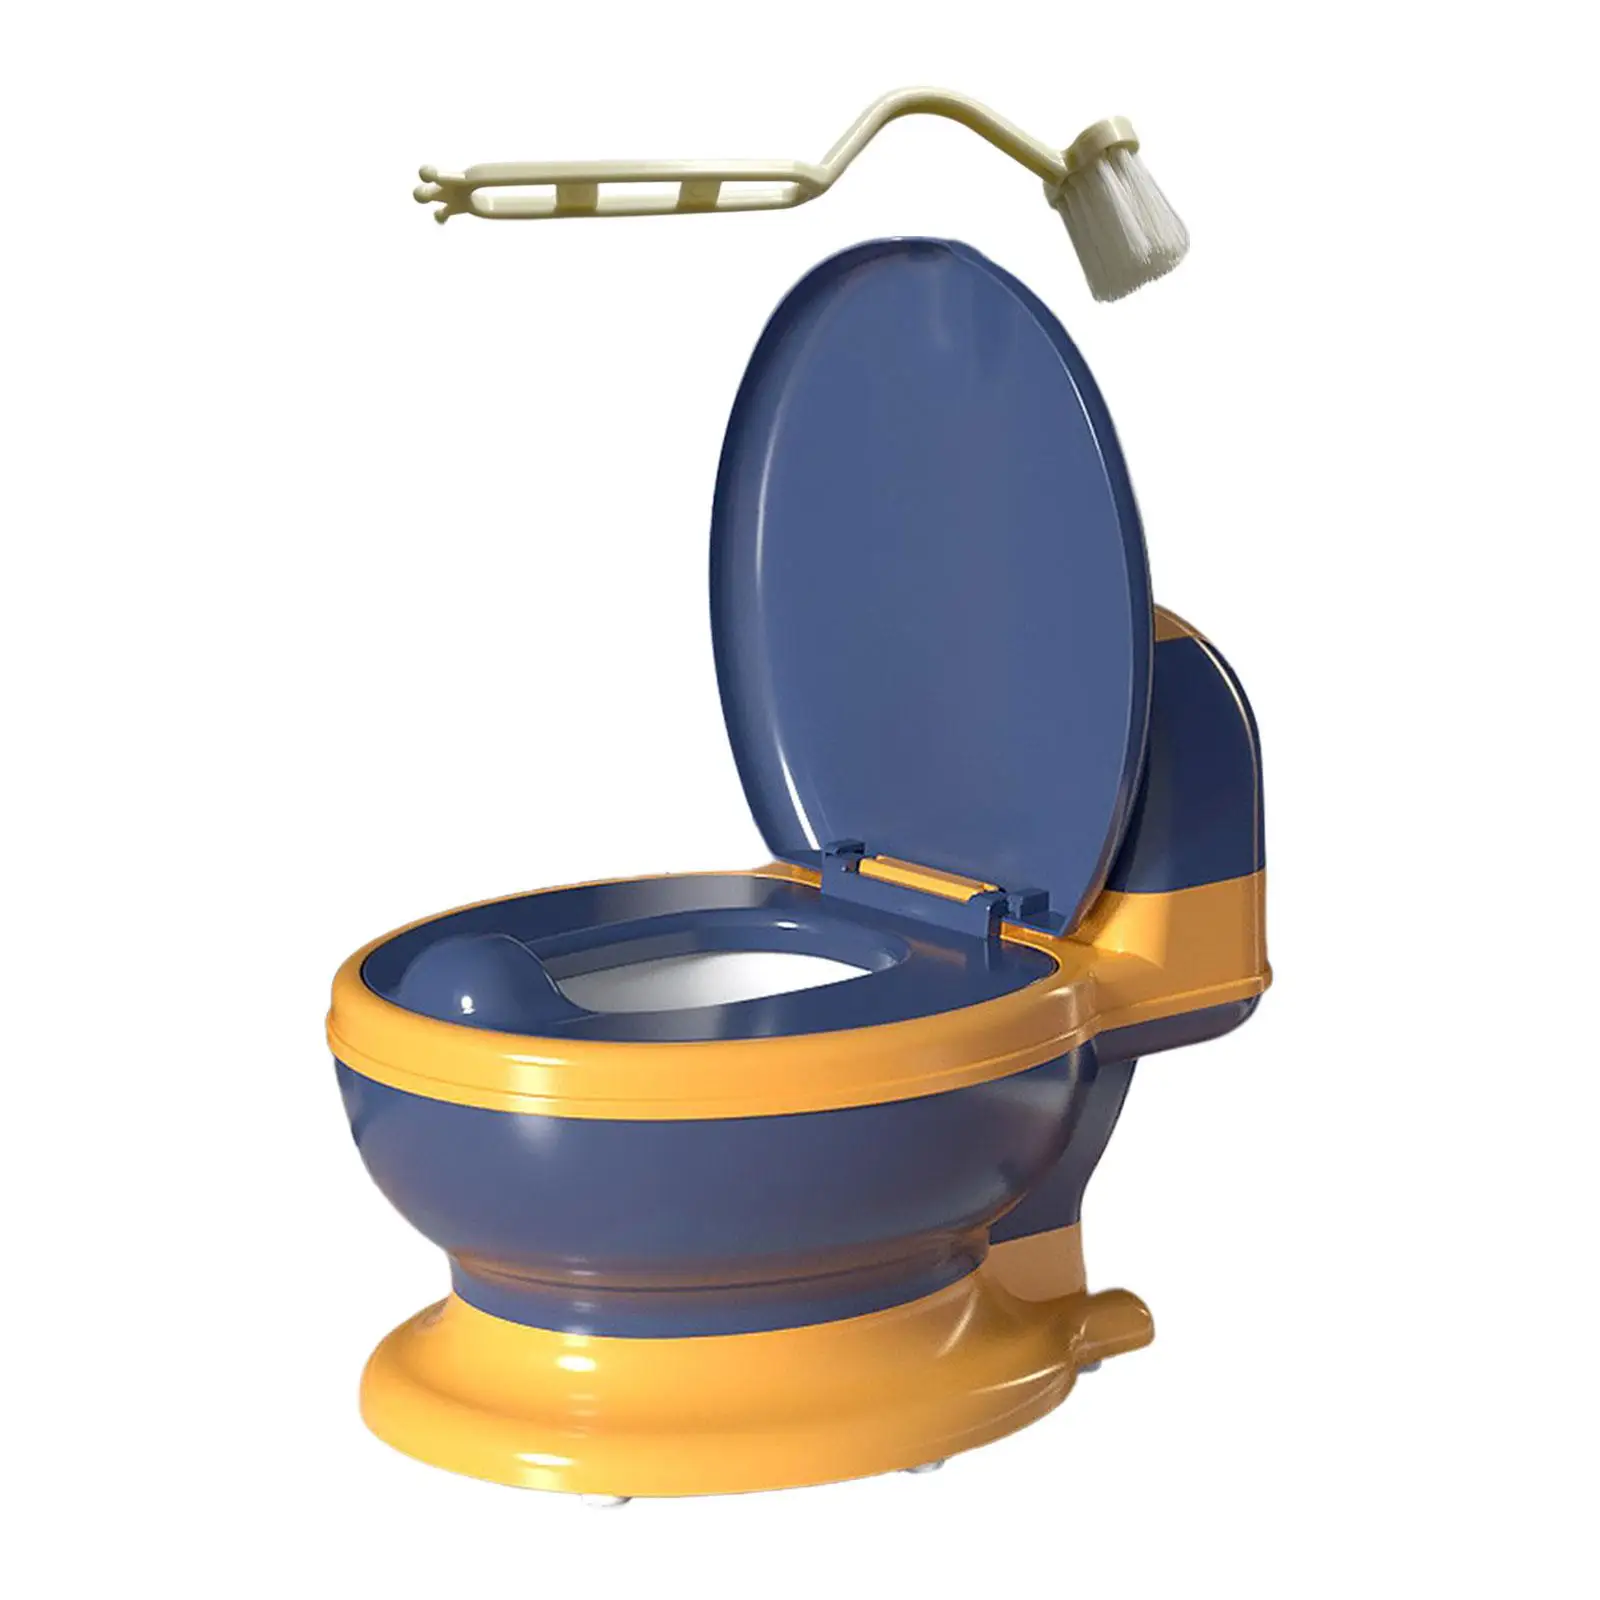 Toilet Training Potty Includes Cleaning Brush Compact Size Comfortable with Wipe Storage Real Feel Potty Kids Infants Girls Boys